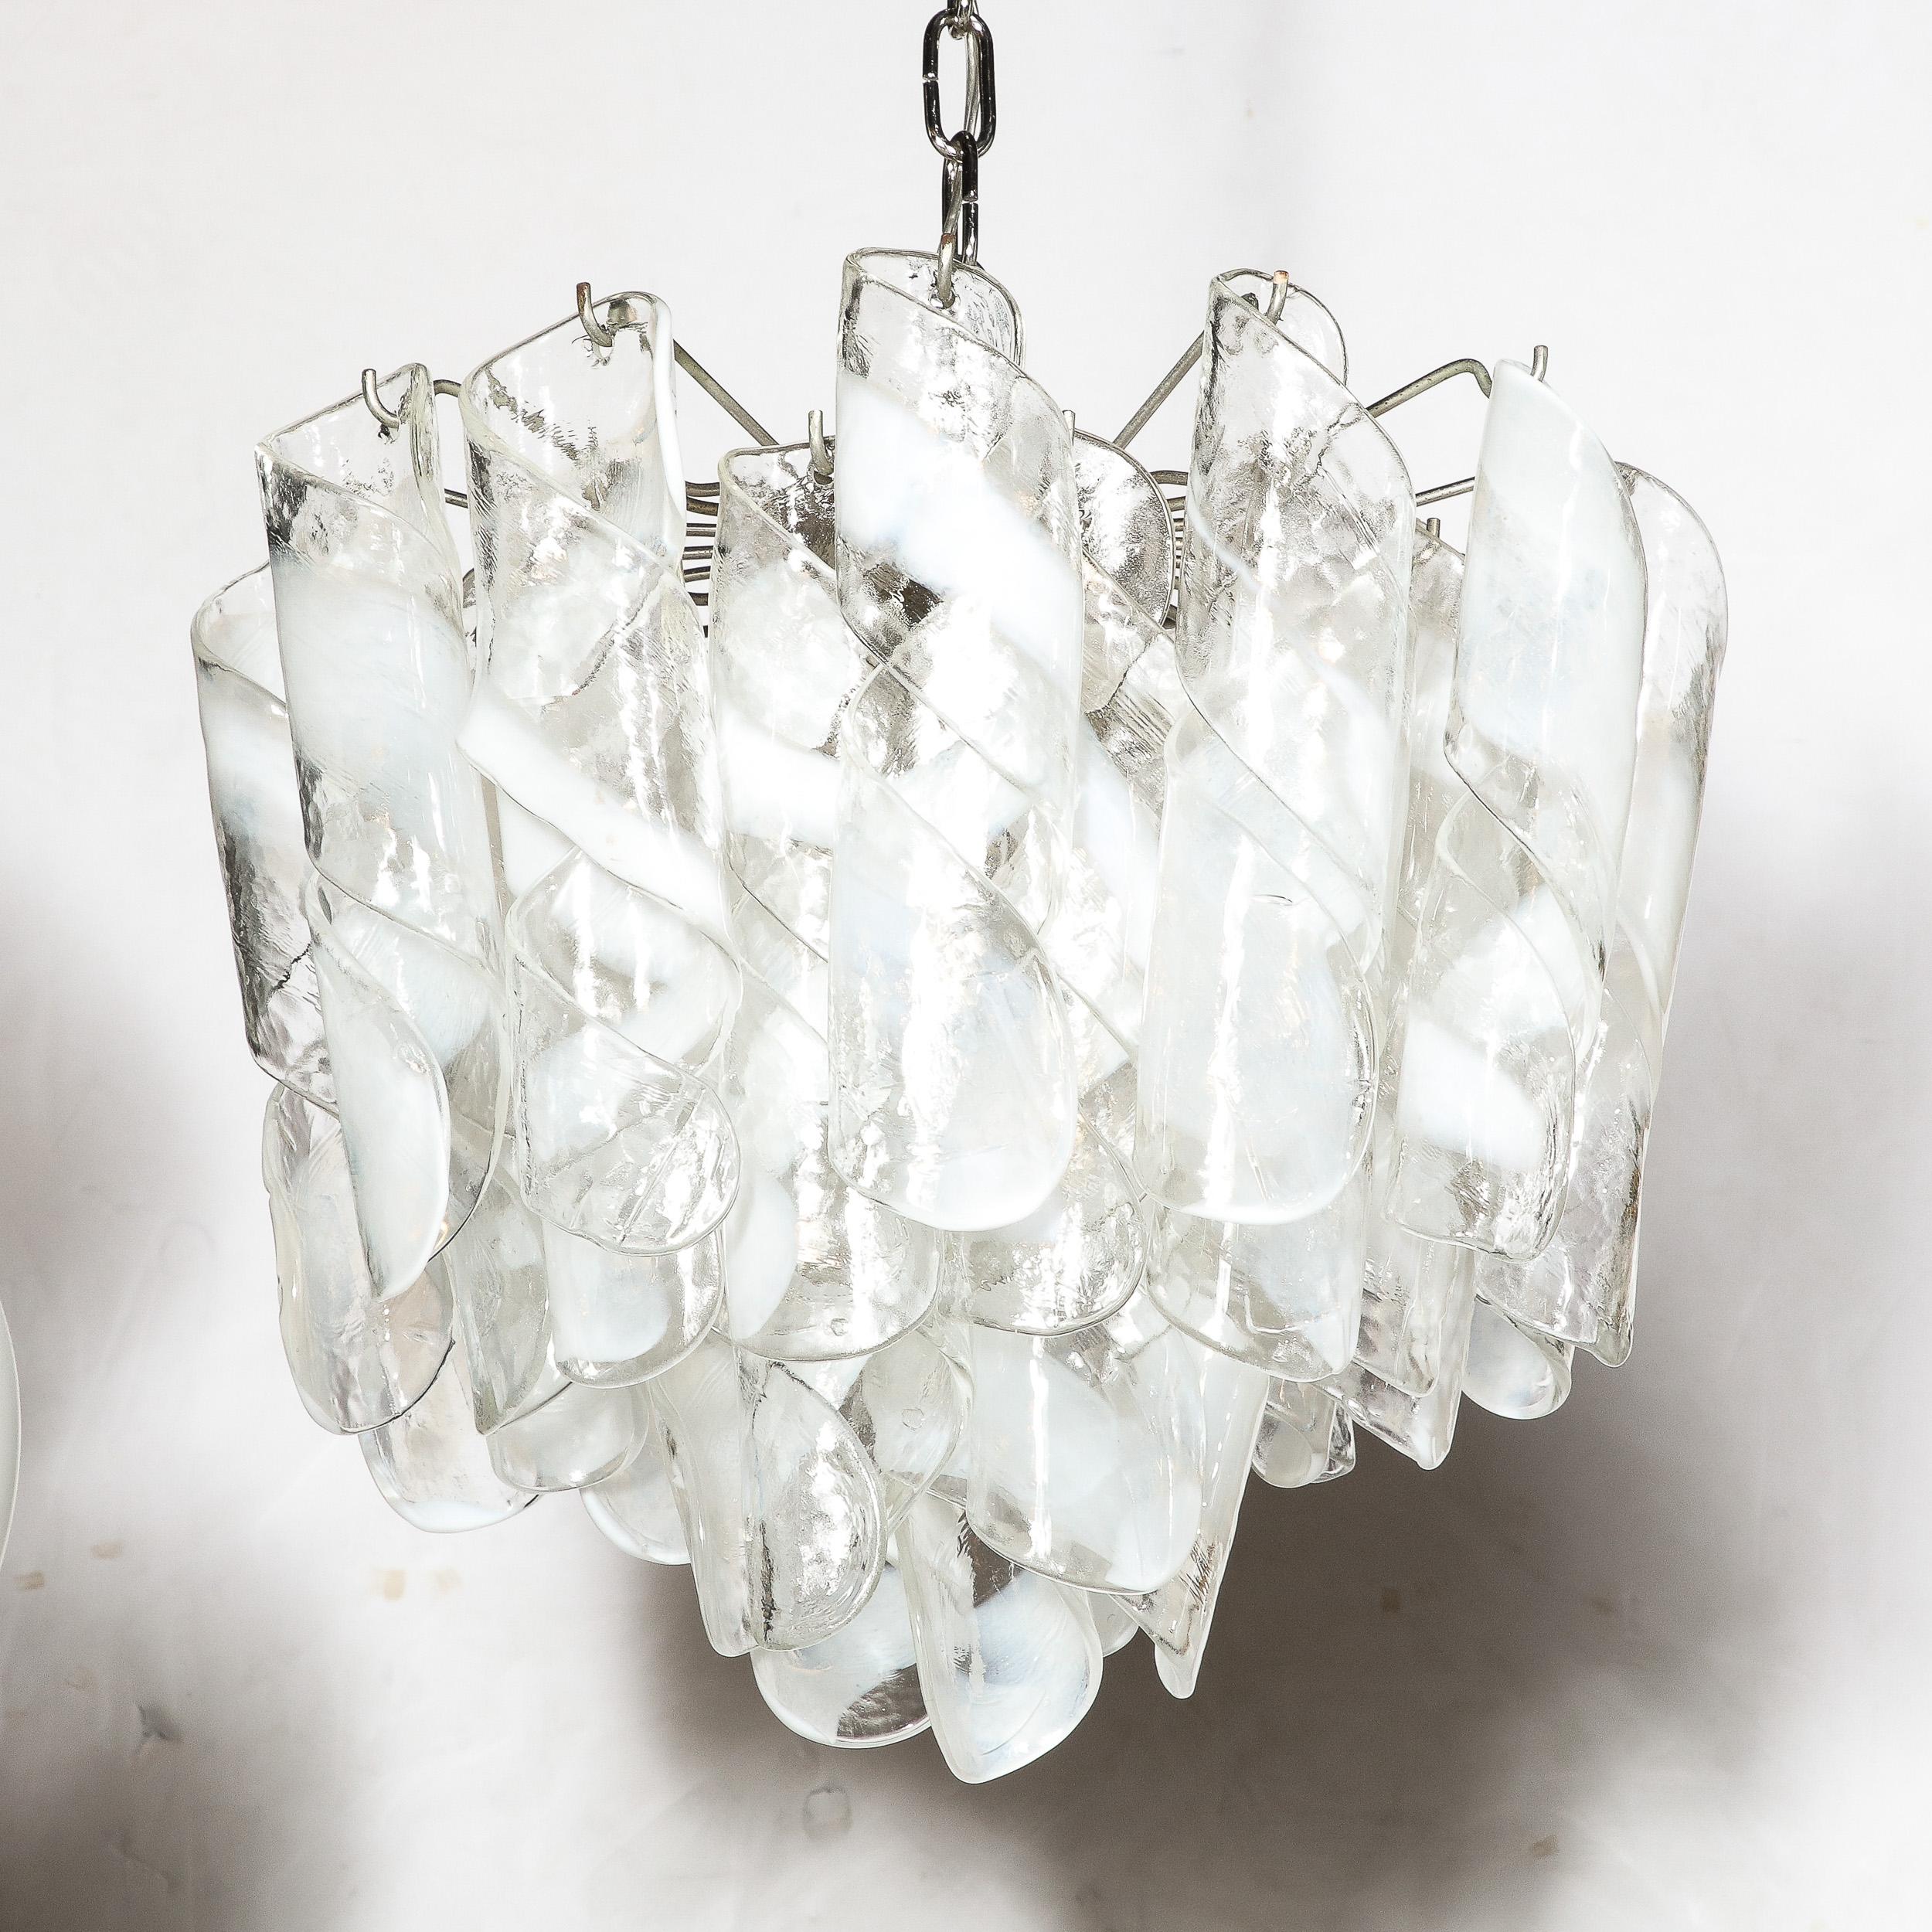 Italian Mid-Century Modernist Hand-Blown Murano Glass Torciglioni Chandelier By Mazzega For Sale